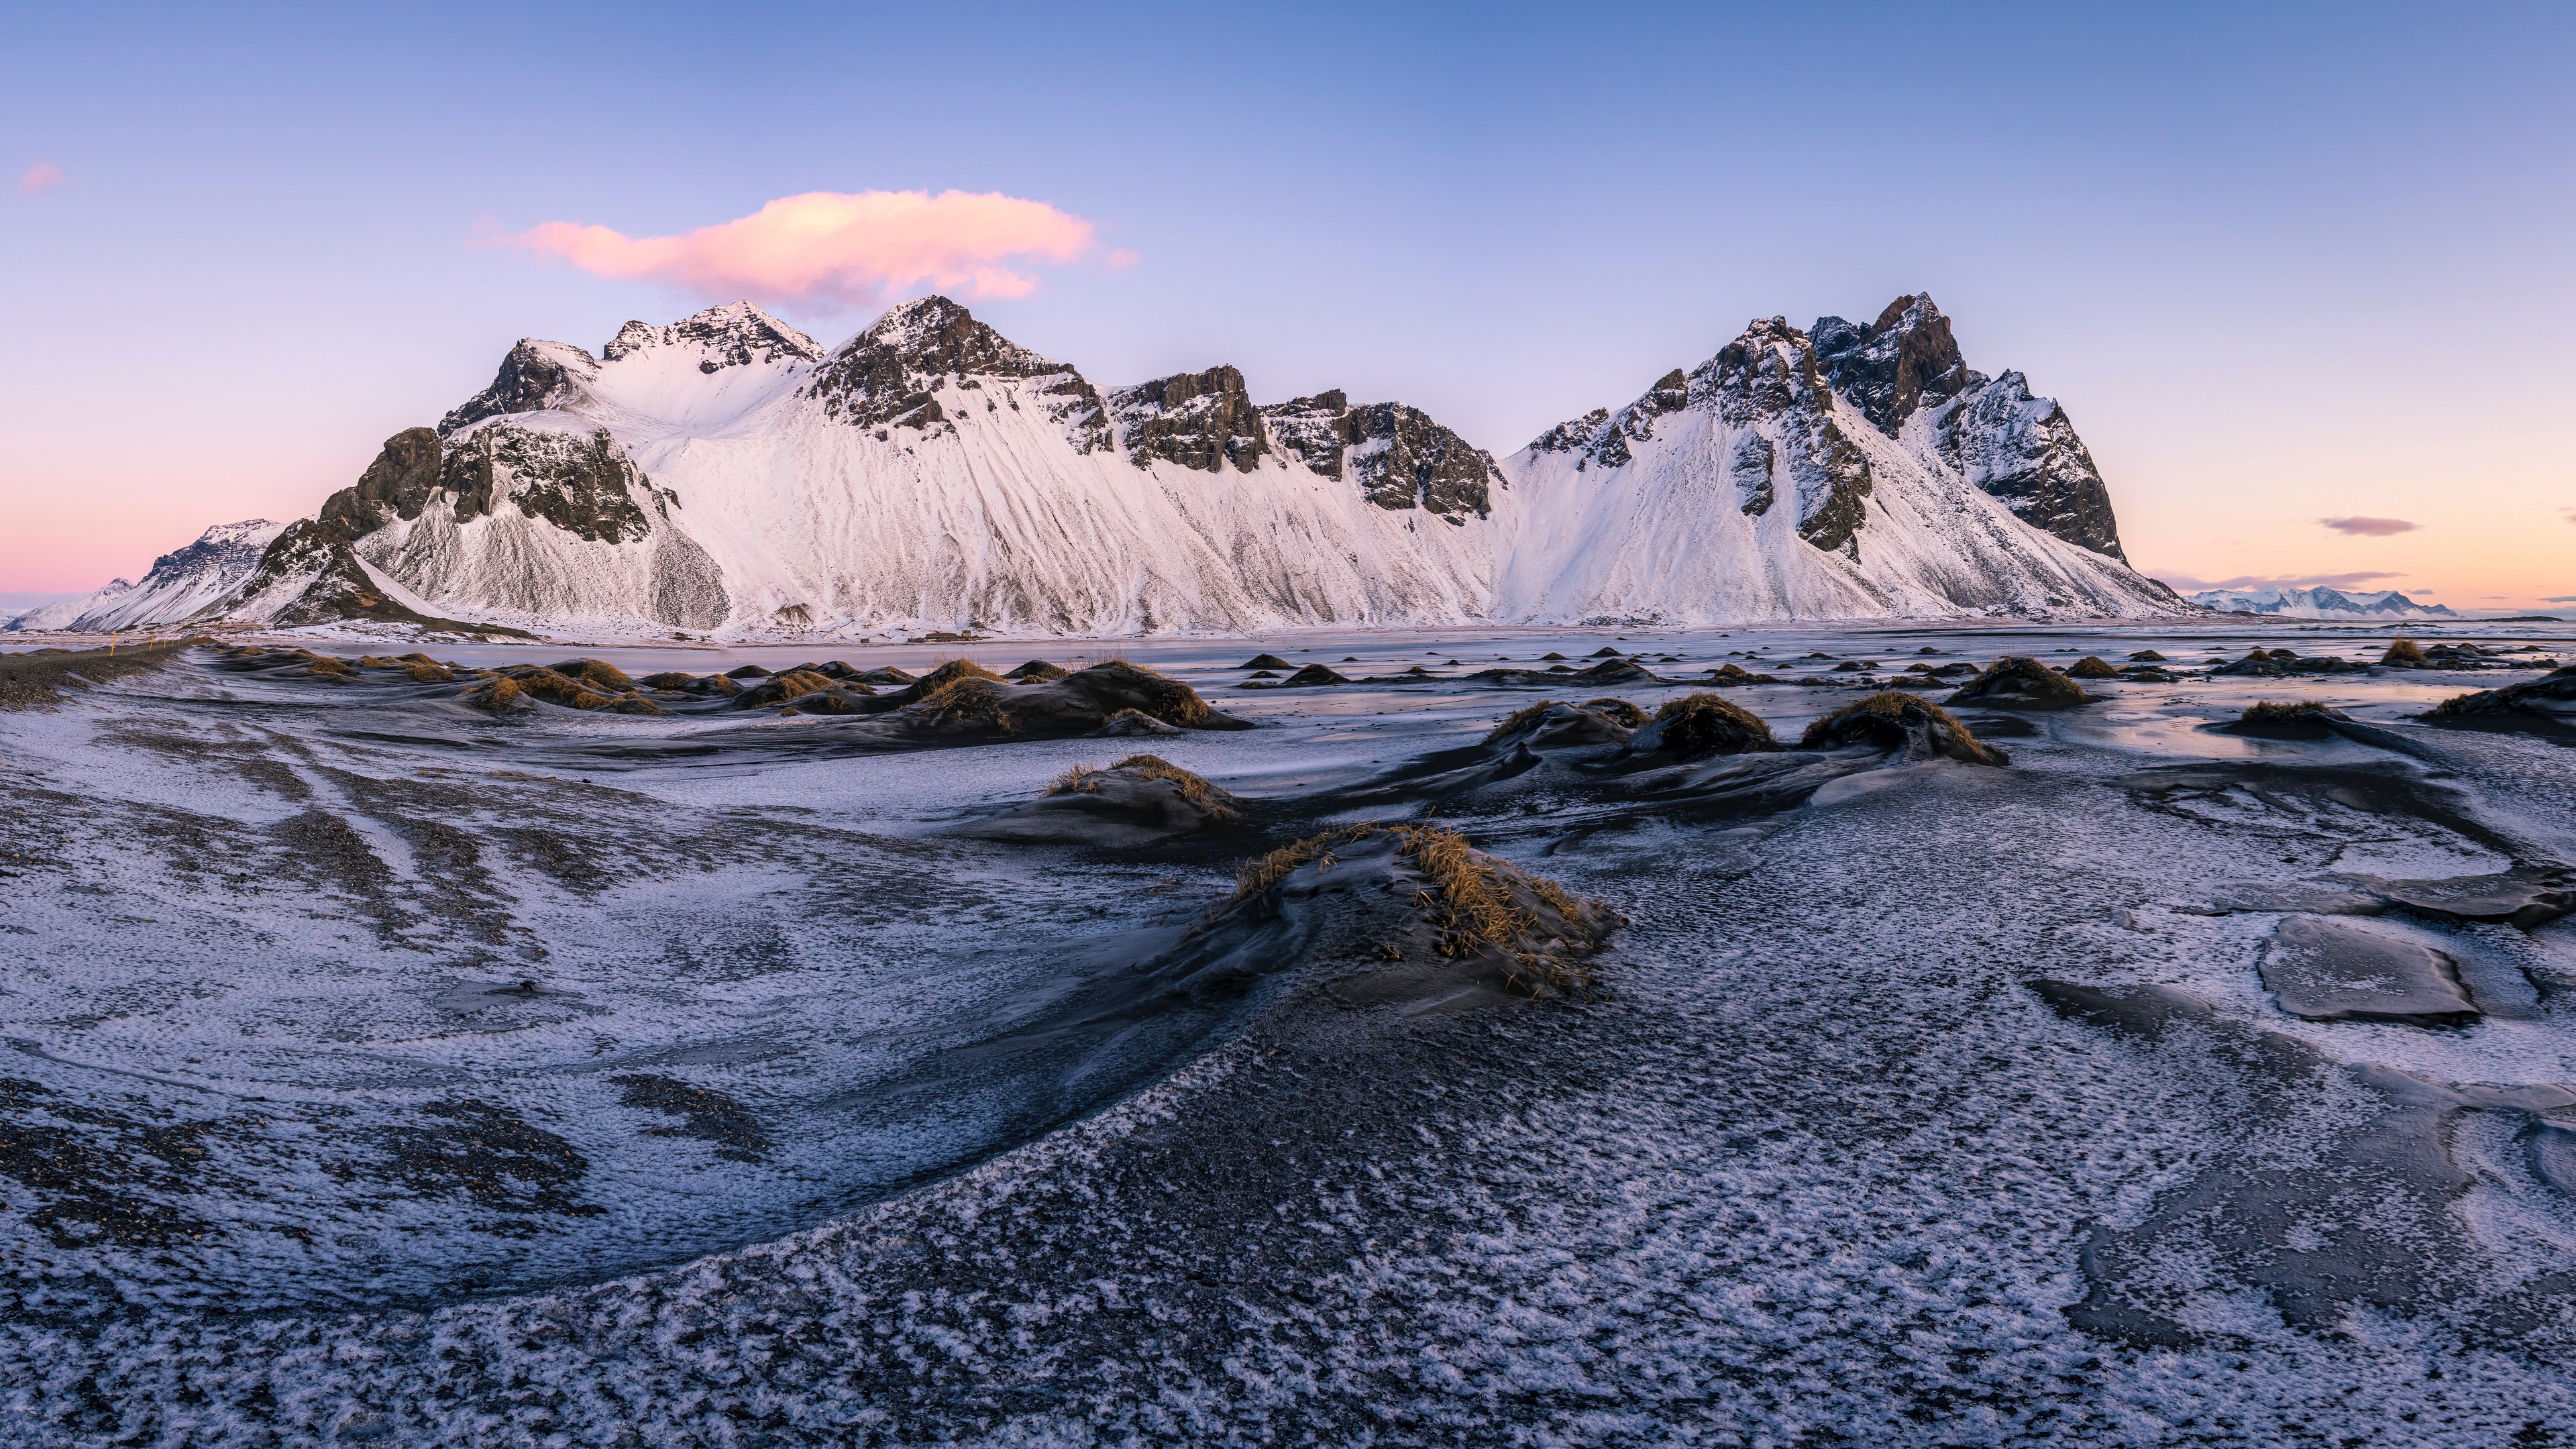 First snow appears off the coast of vestrahorn